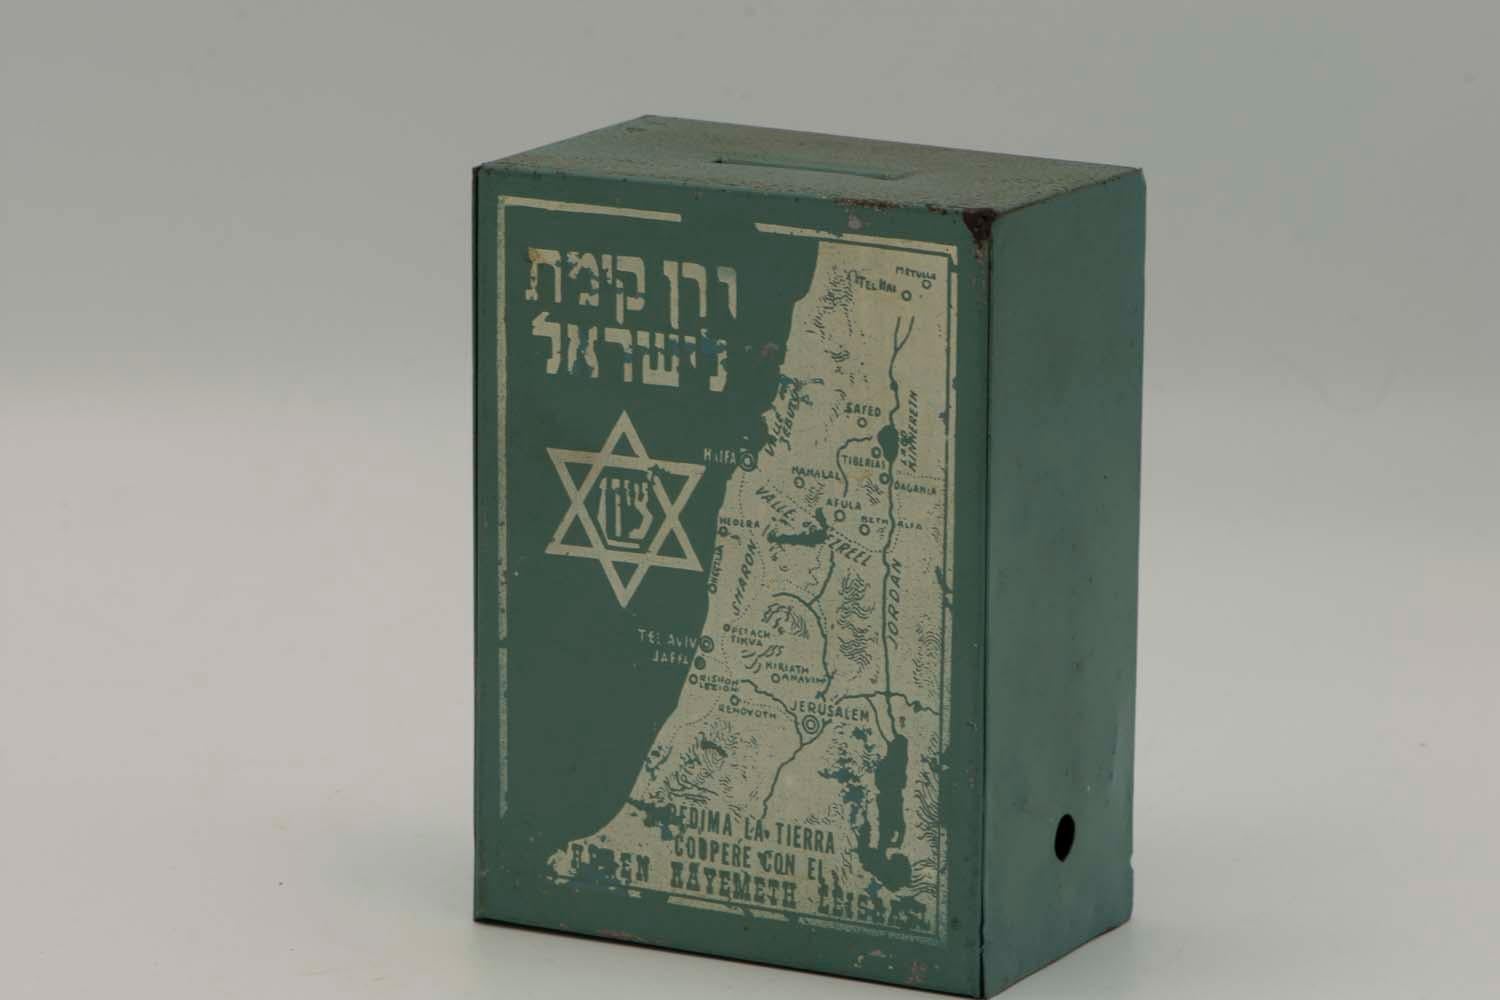 Extremely rare South American Iron JNF/KKL Charity box, circa 1920.
Decorated with a map of Israel, Star of David with the word Zion inside, and titled in Hebrew 